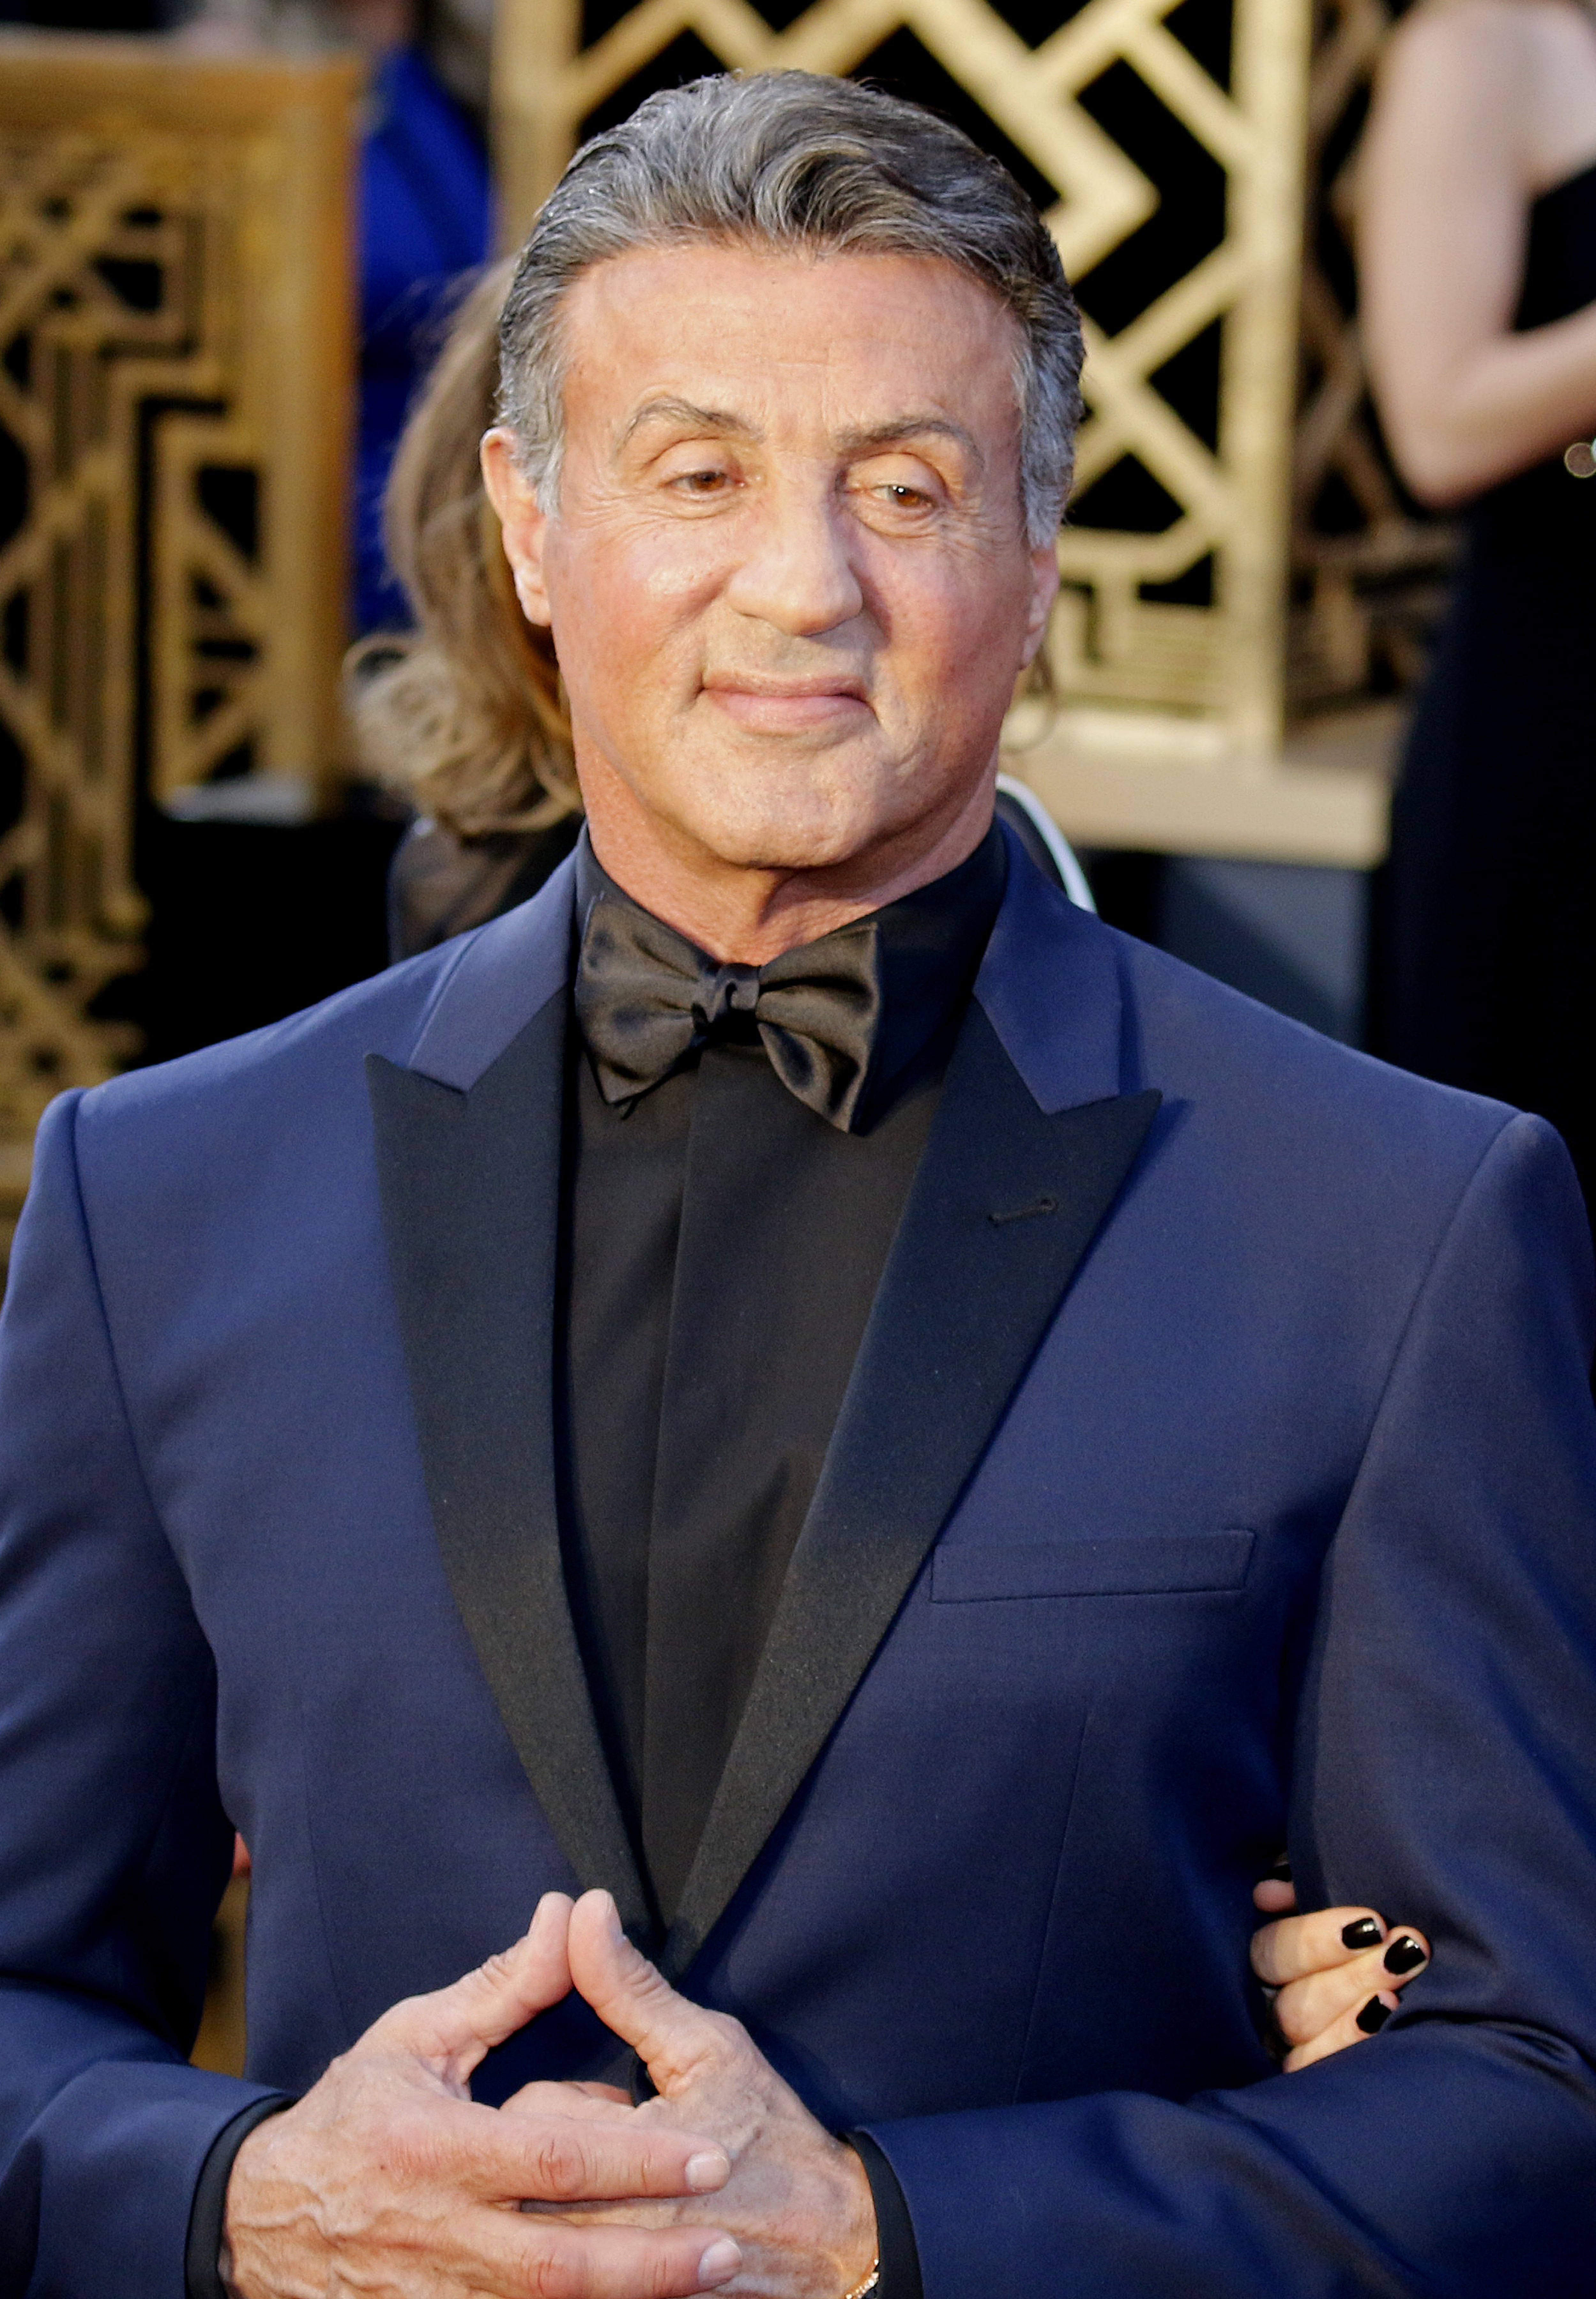 Sylvester Stallone in Hollywood, USA am 28. Februar 2016. | Quelle: Shutterstock